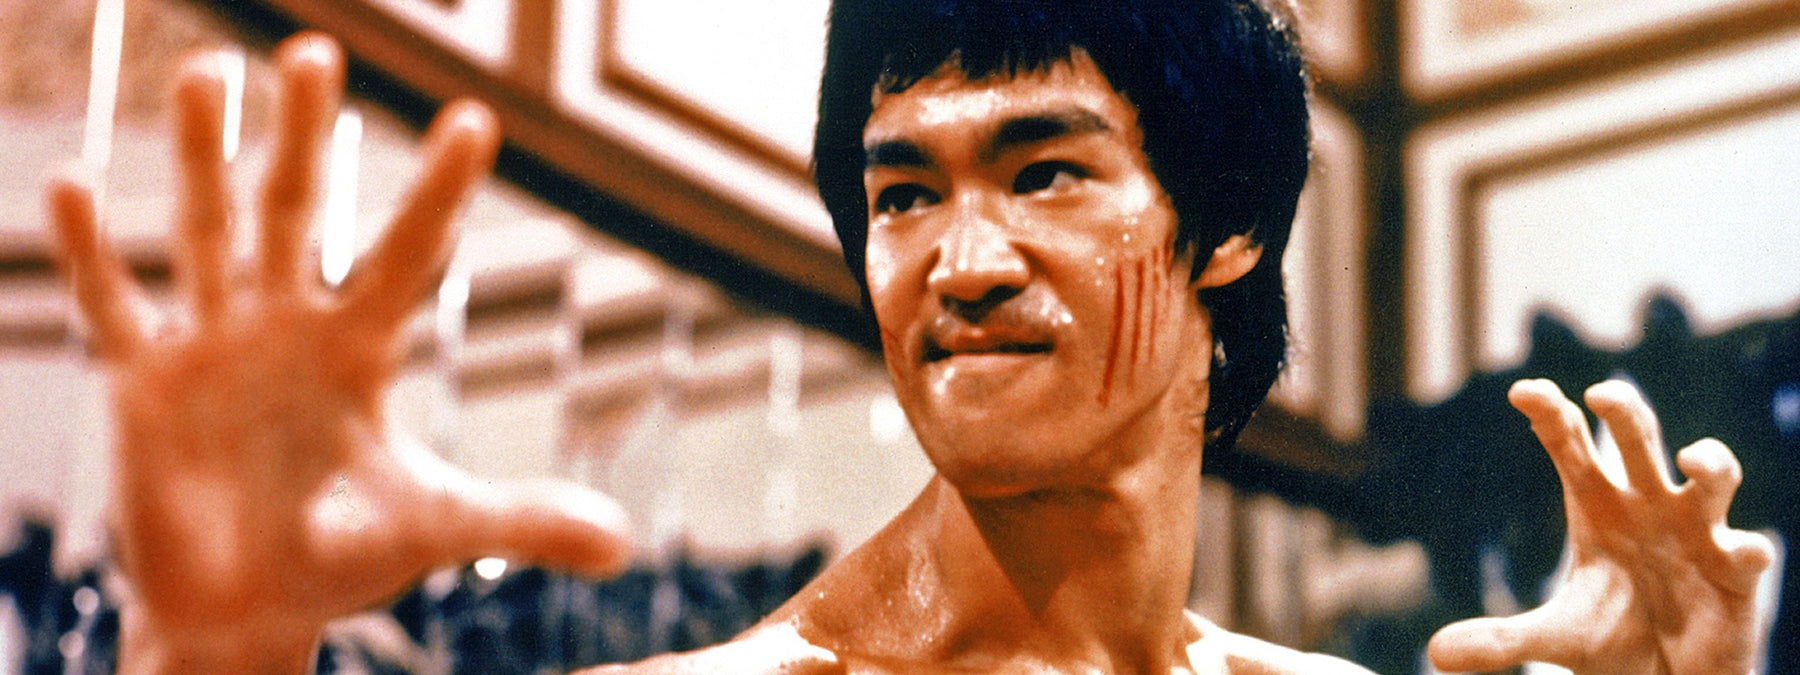 51 Bruce Lee Quotes to Power Your Day